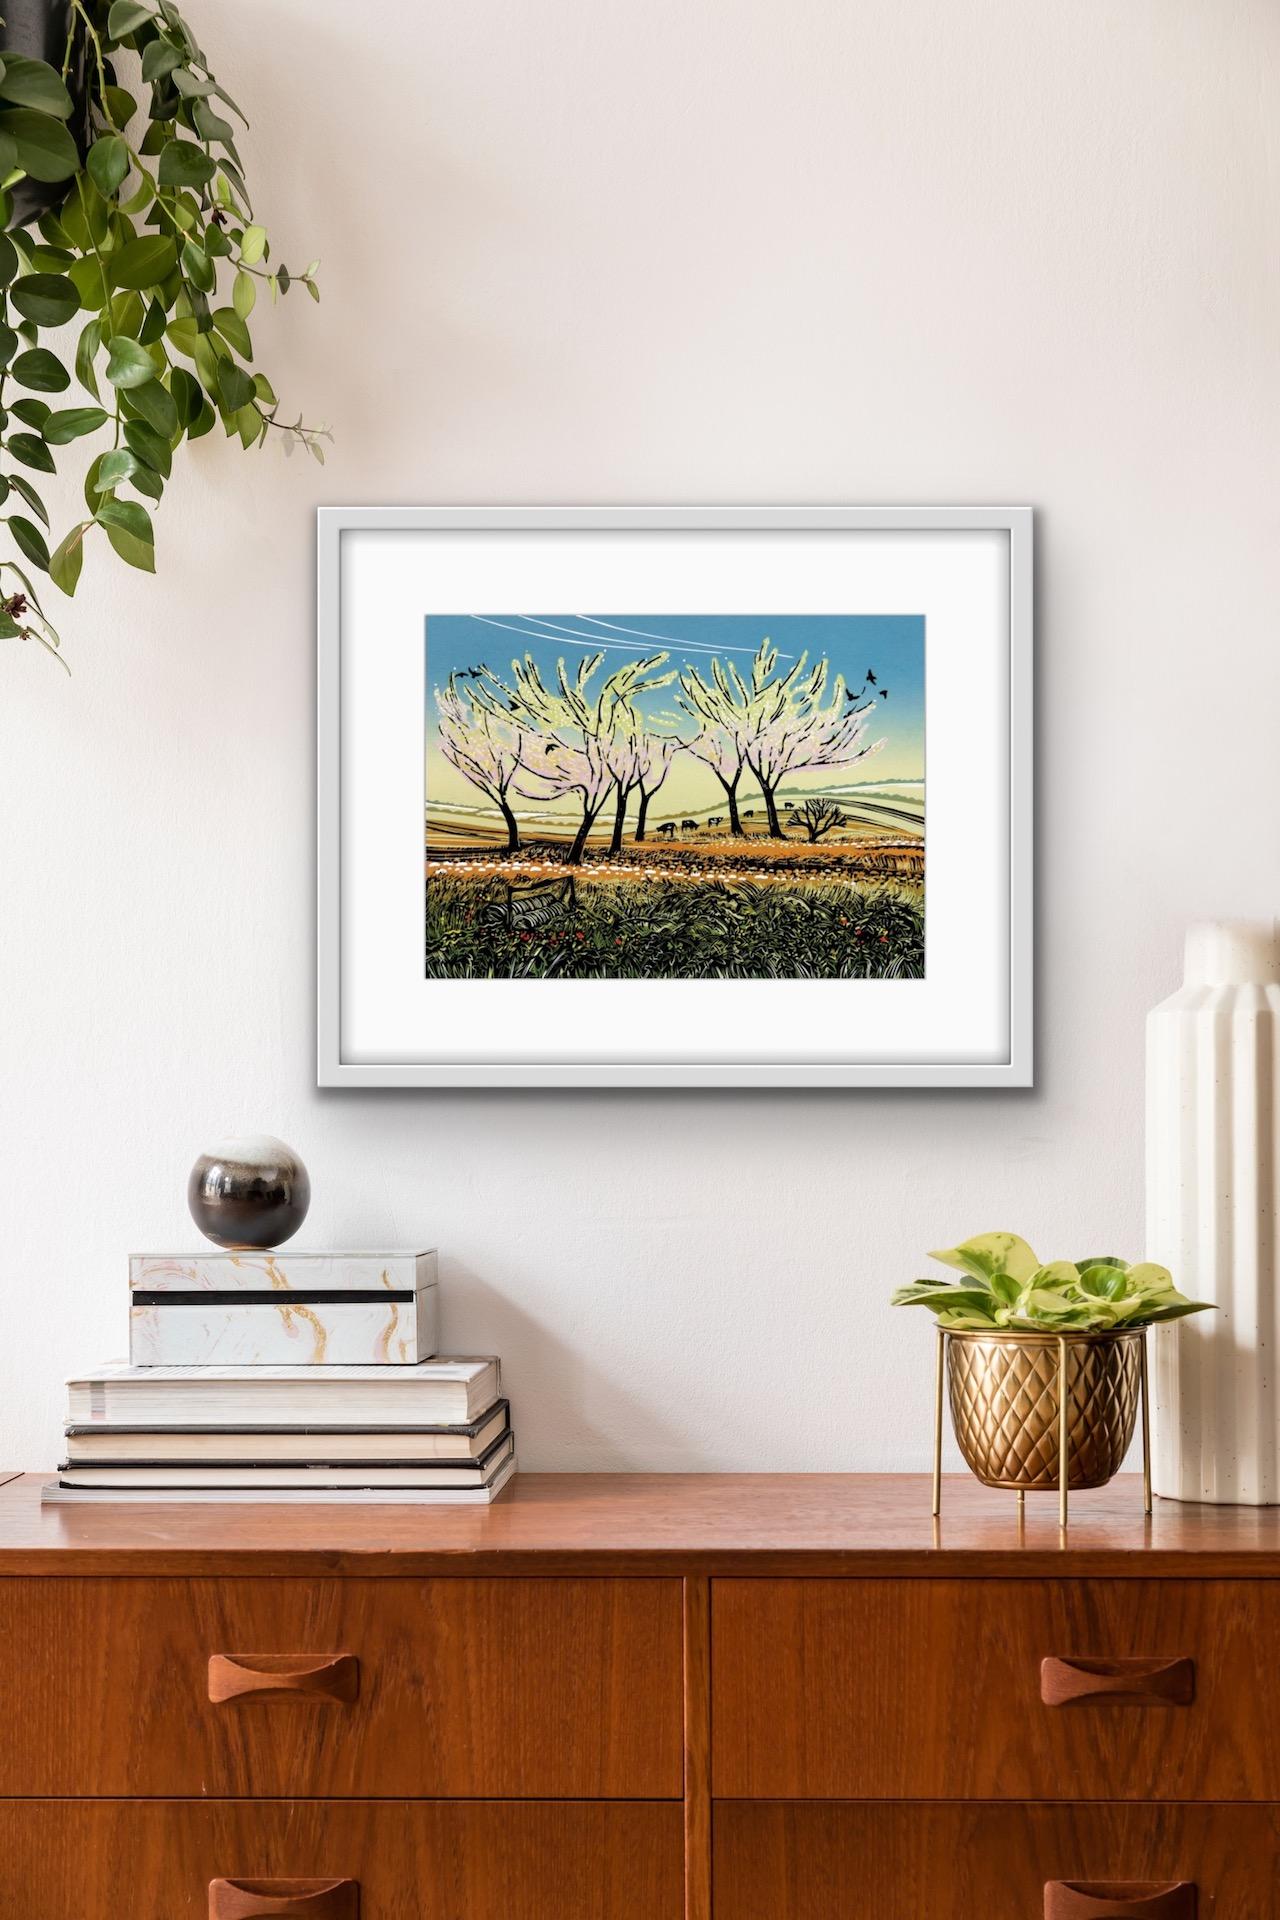 Rob Barnes, Blossom in the Wind, Limited Edition Landscape Print, Affordable Art 4